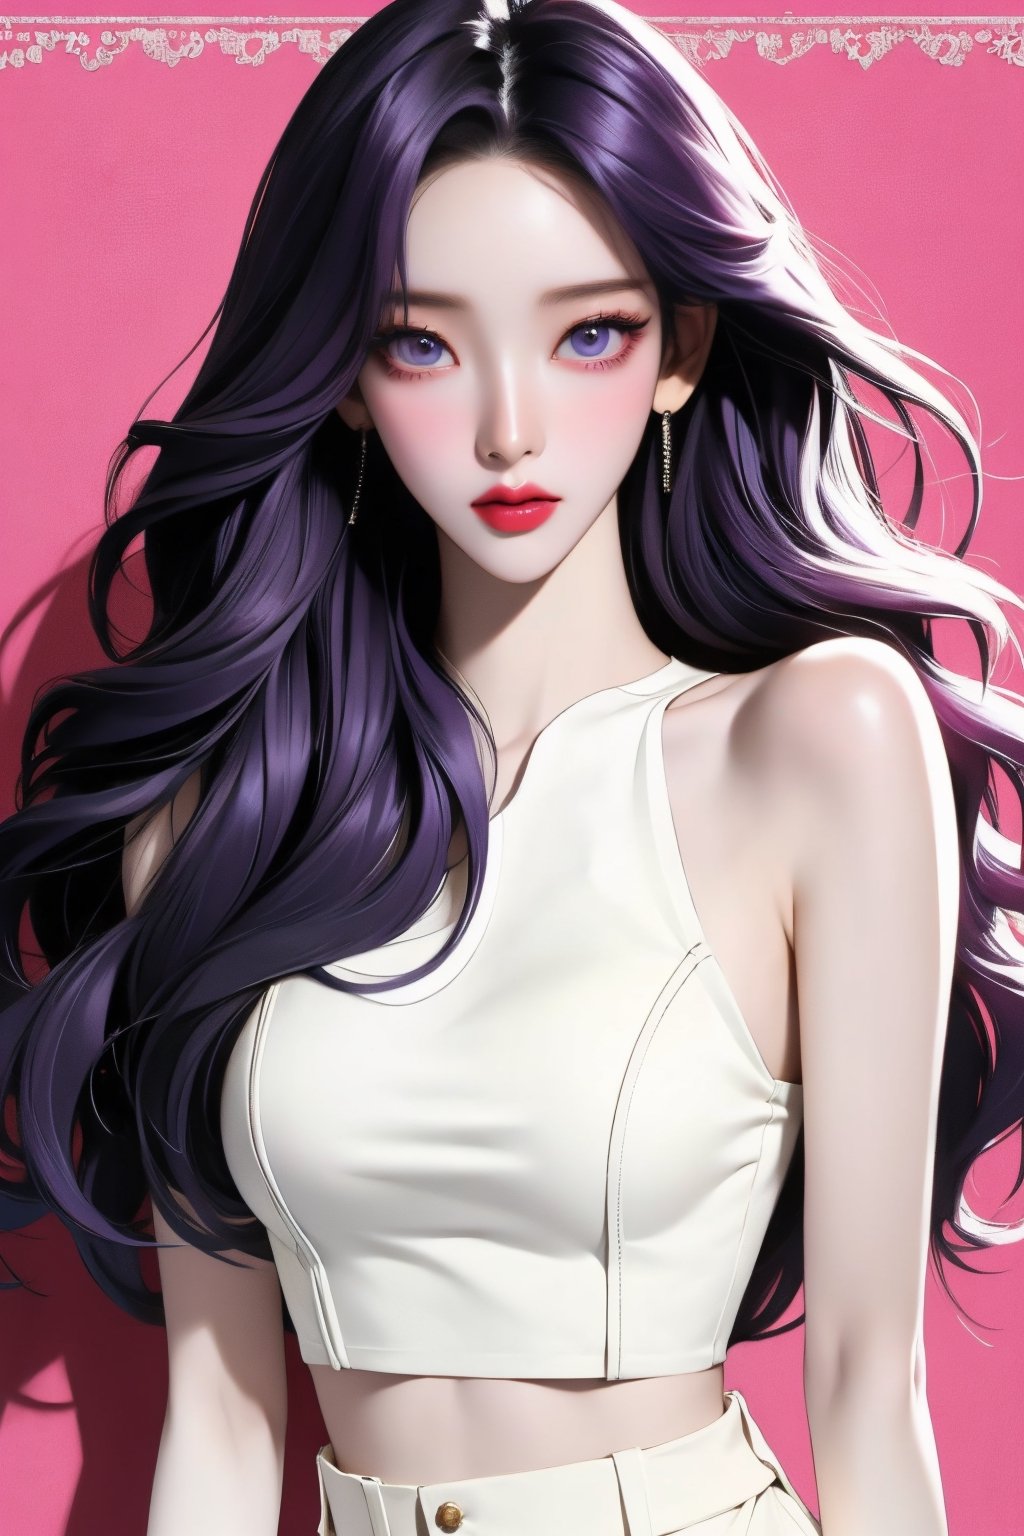 Title: "Ethereal Allure: Yoona's Captivating Presence"

Description: Immerse yourself in the mesmerizing world of Yoona's captivating allure with this dynamic magazine cover. As a talented singer and beloved idol, Yoona commands attention with her striking presence and ethereal beauty.

In this lifelike portrayal, Yoona stands tall, her purple hair styled to perfection, and her gaze fixed directly on the viewer. Her face, delicate and exquisite, is framed by sleek black hair, with red glossy lips adding a touch of allure to her beautiful features.

Dressed in a stylish crop top and skirt with cutout details, Yoona's ultra-detailed appearance is captured in the best quality photography, with sharp focus enhancing every aspect of her stunning presence. The natural lighting accentuates her flawless complexion, highlighting her soft, perky breasts and slim waistline.

With a sexy pose and a look of confidence in her big eyes, Yoona exudes an irresistible charm that is sure to captivate fans and admirers alike. This magazine cover celebrates Yoona's unparalleled beauty and talent, cementing her status as a true icon in the world of entertainment.,mature female,Asia